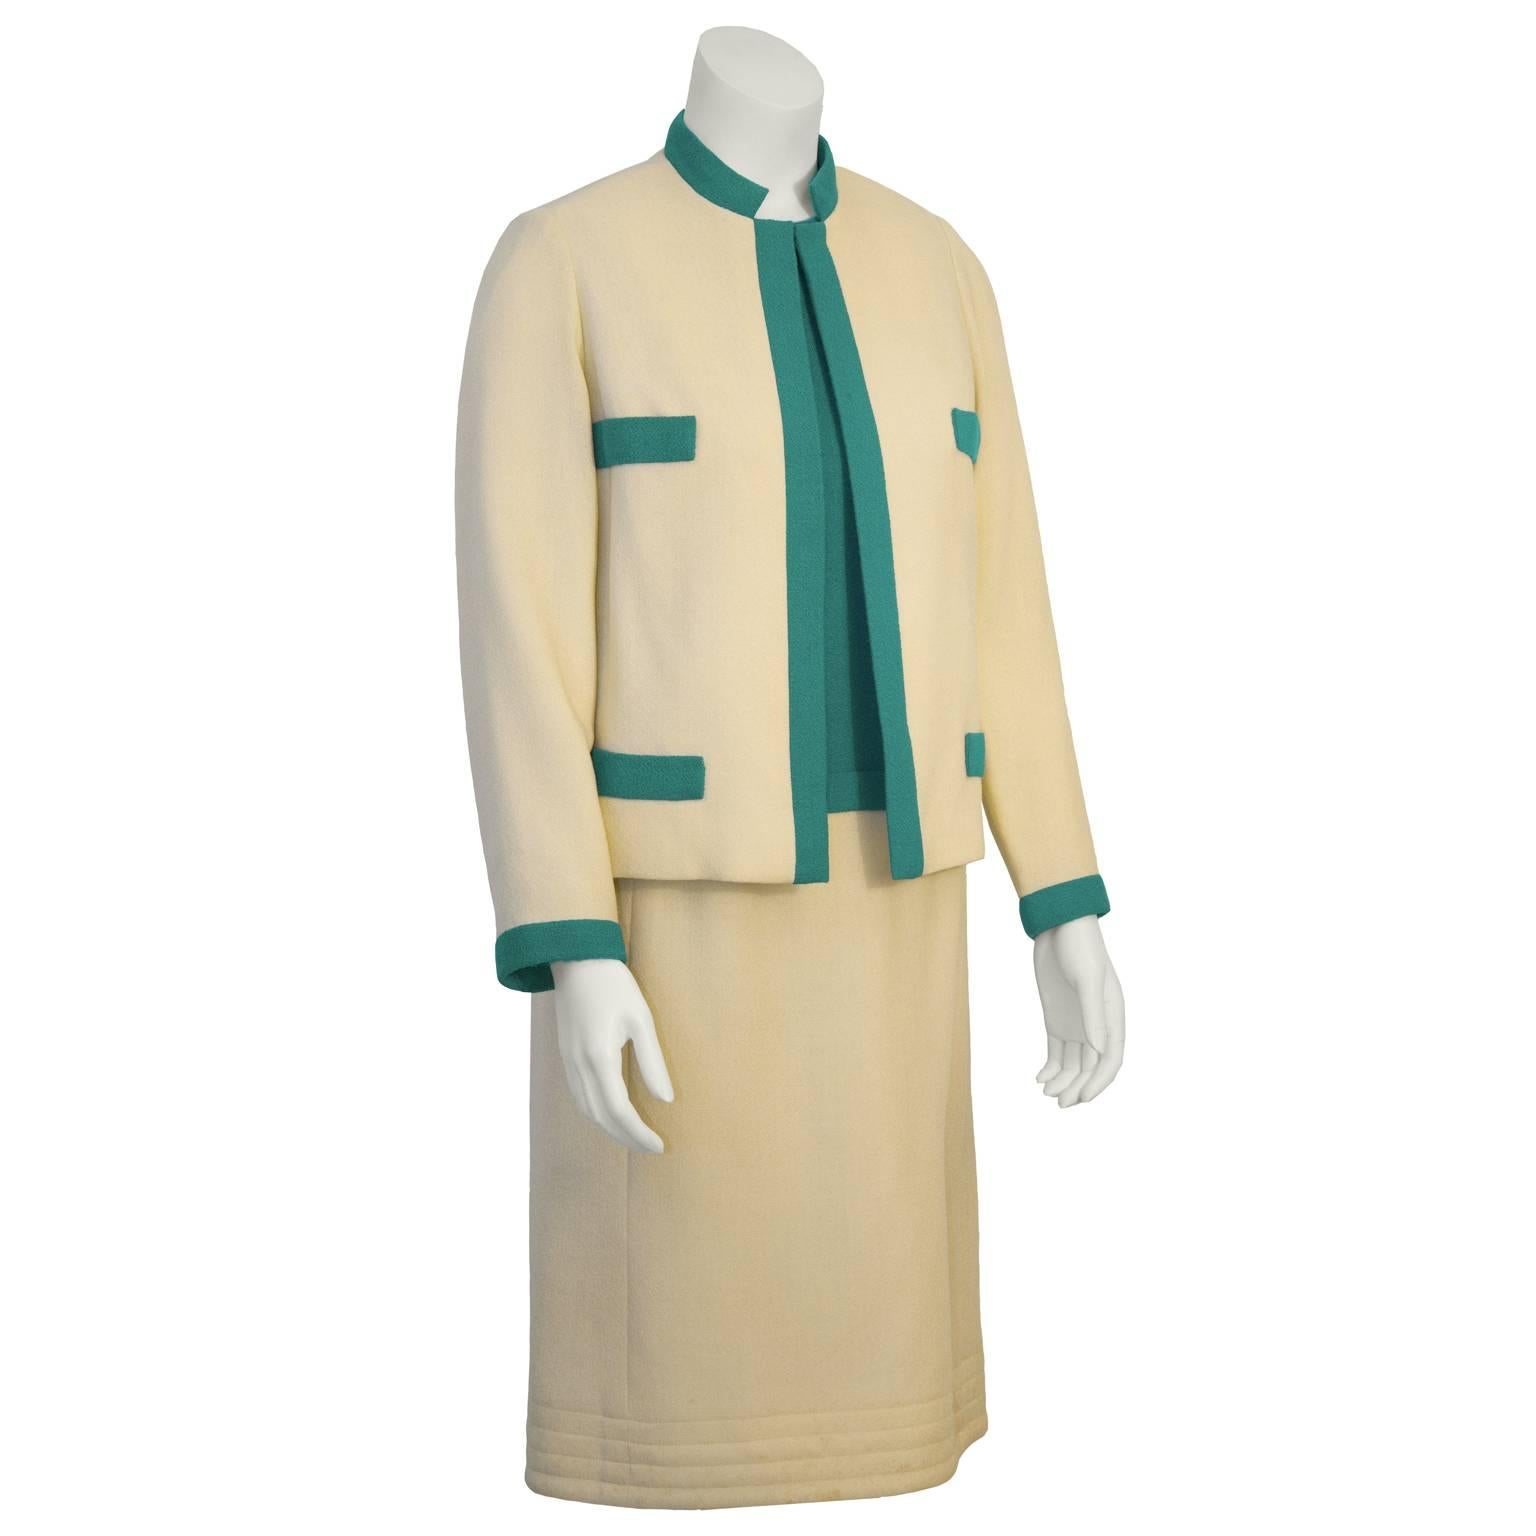 Chic 1960's Mary Korolnek cream and green raw silk dress and jacket ensemble. Jacket has green trim, four faux green flap pockets, and a single hook and bar closure. Classic Chanel inspired ladylike ensemble.  Sleeveless sheath dress has a green